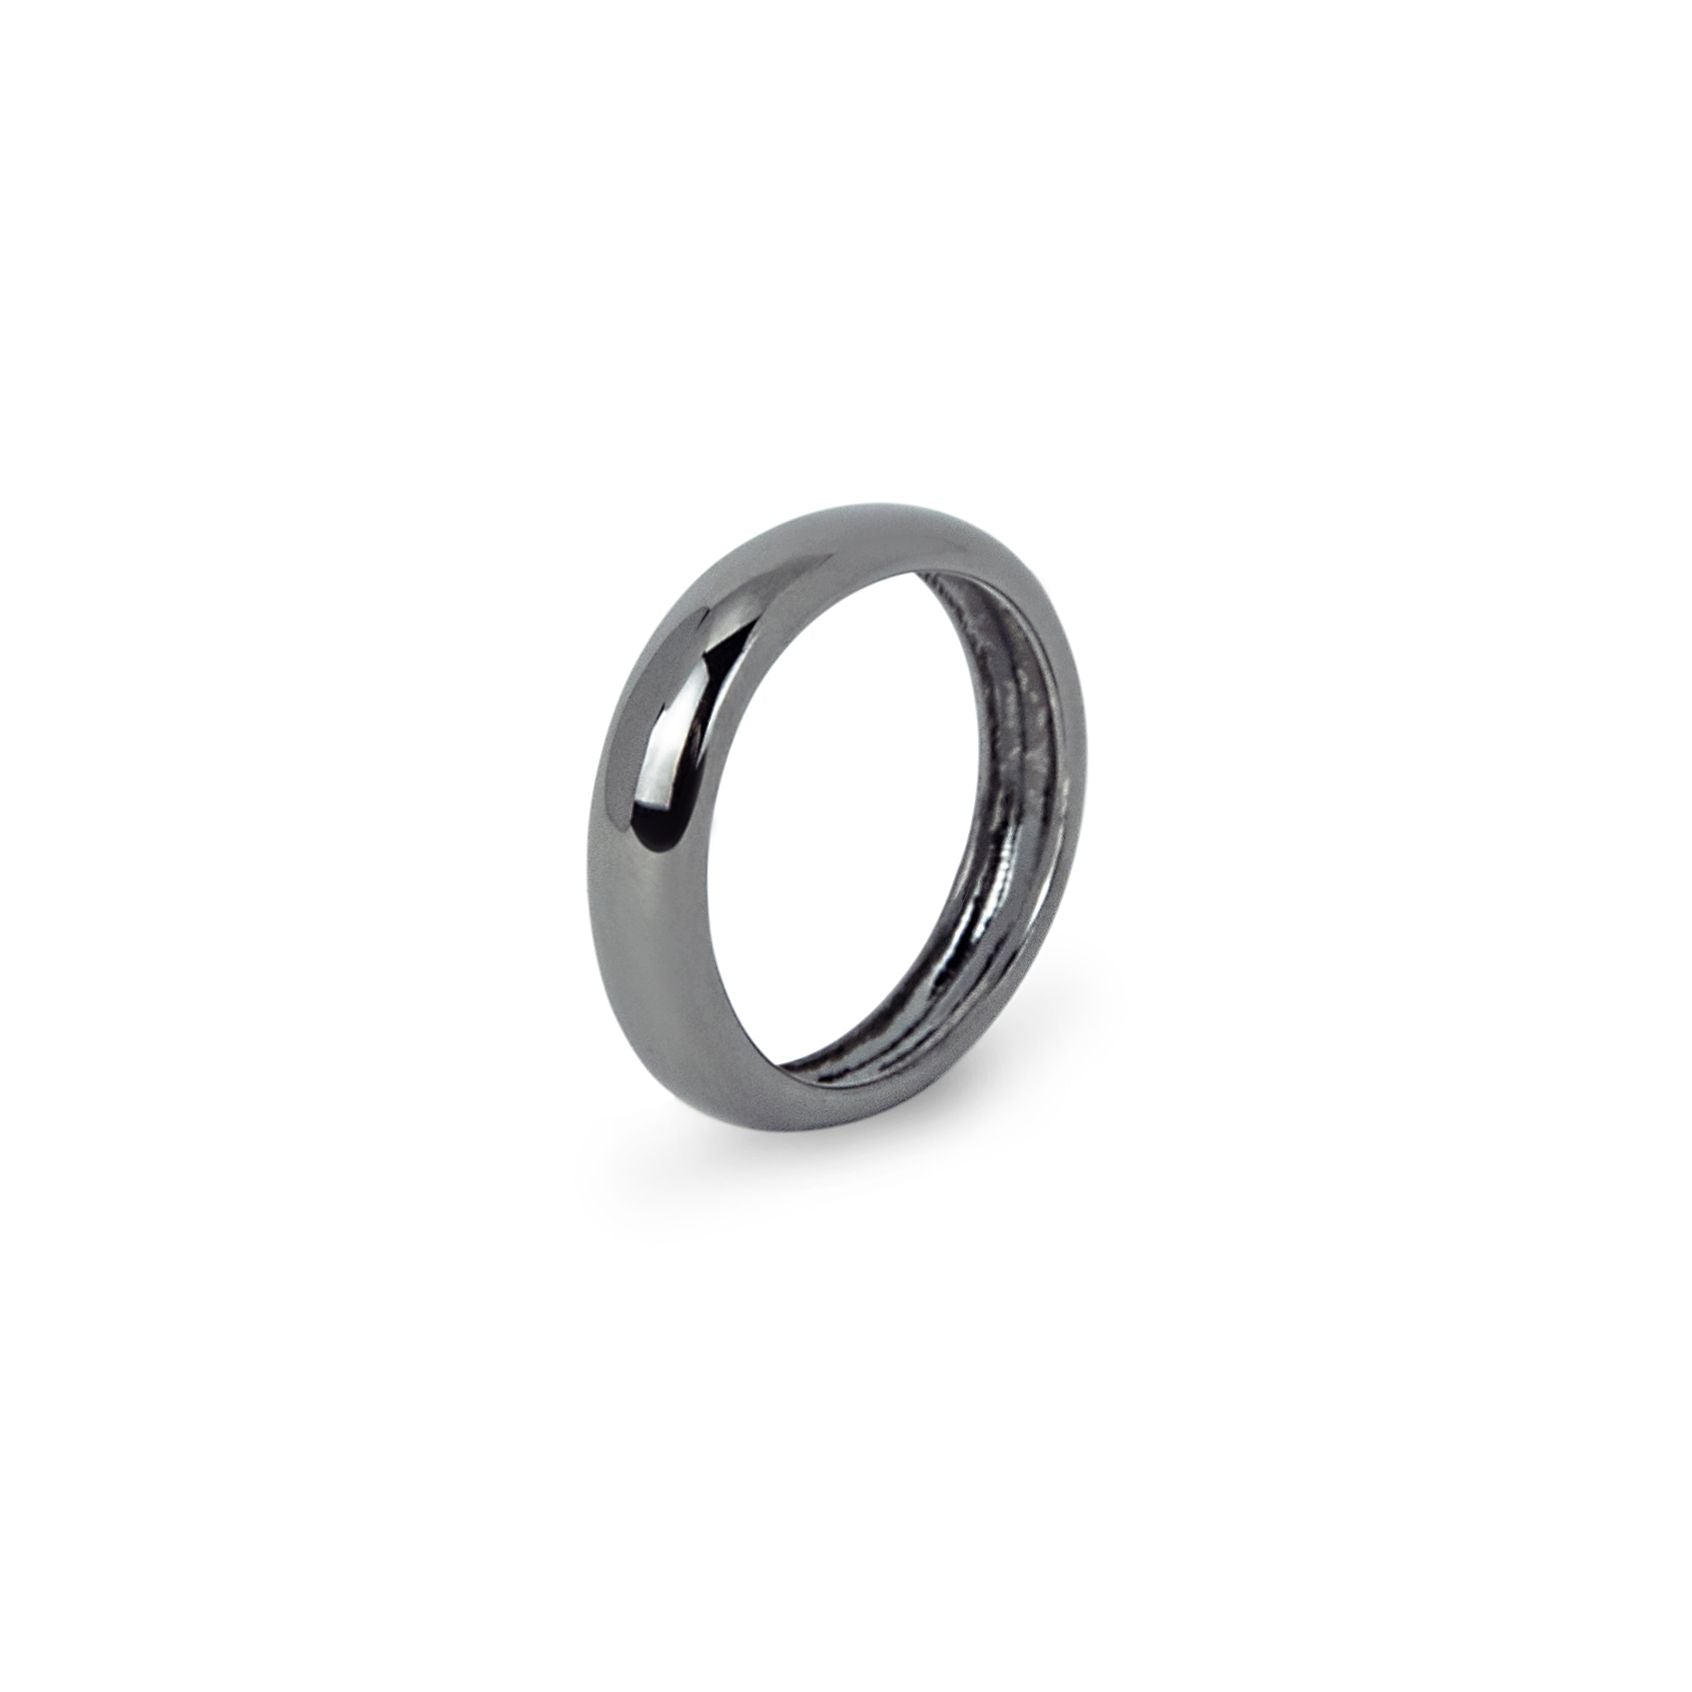 TUBE RING IN BLACK RHODIUM PLATED SILVER